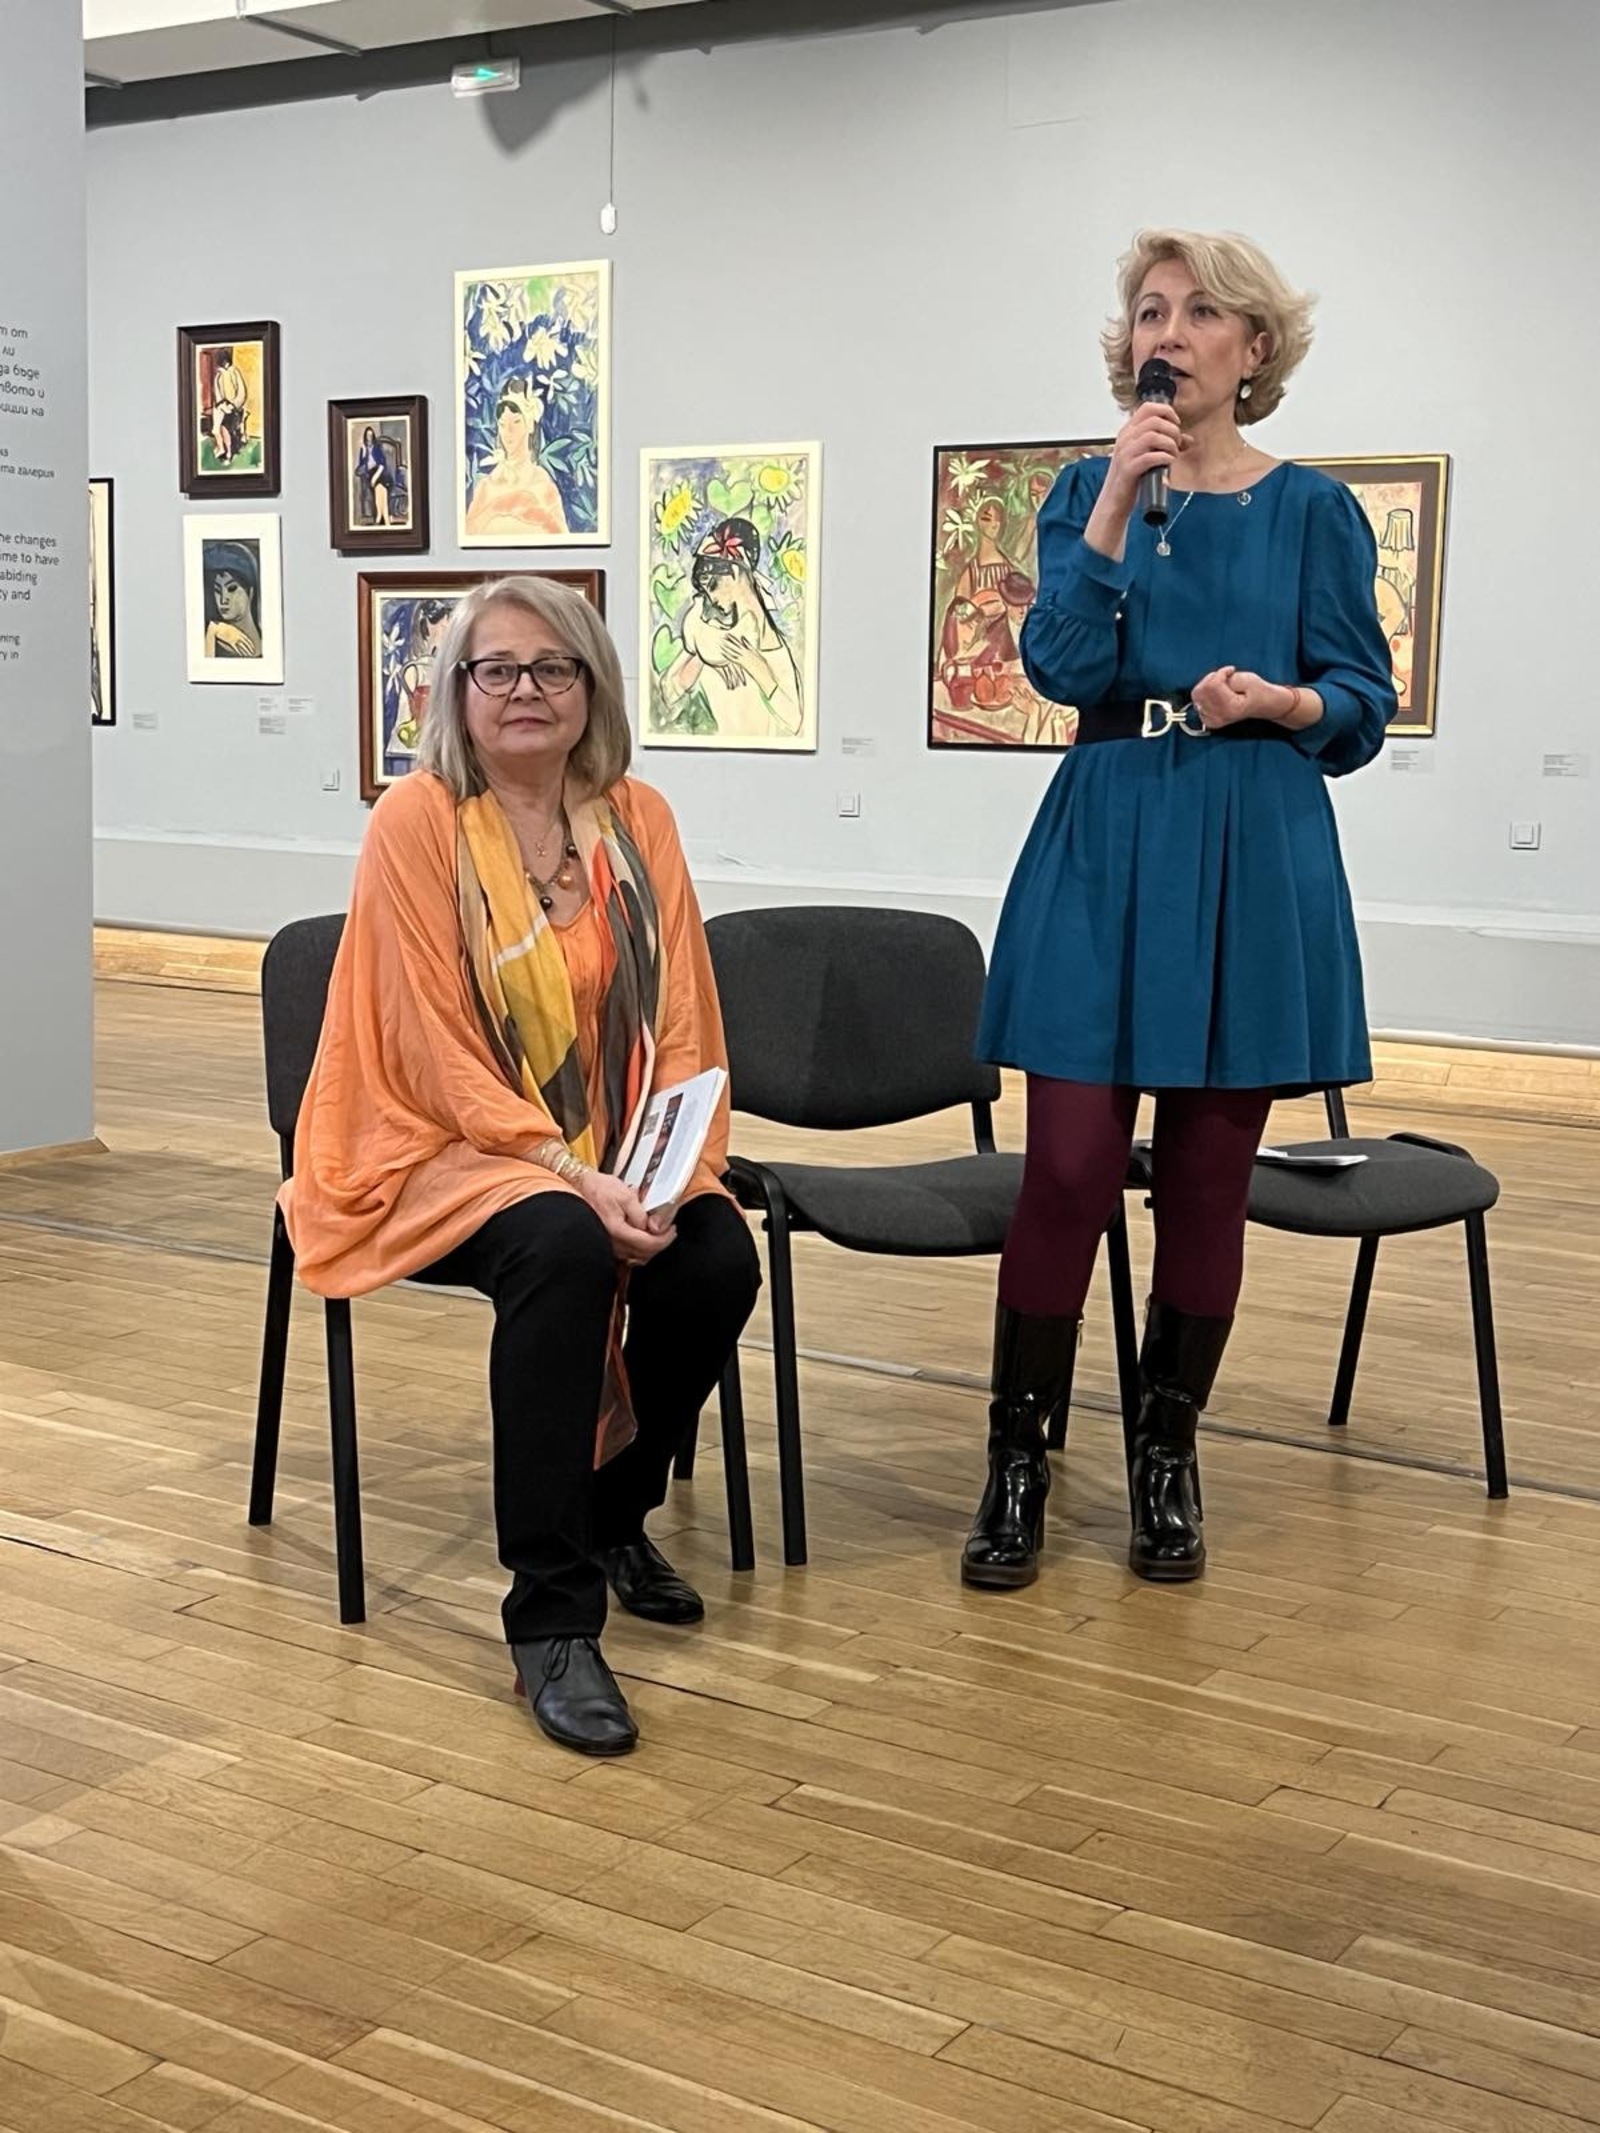 Vanya Radeva presented a collection of poems "Window" in the Sofia City Gallery